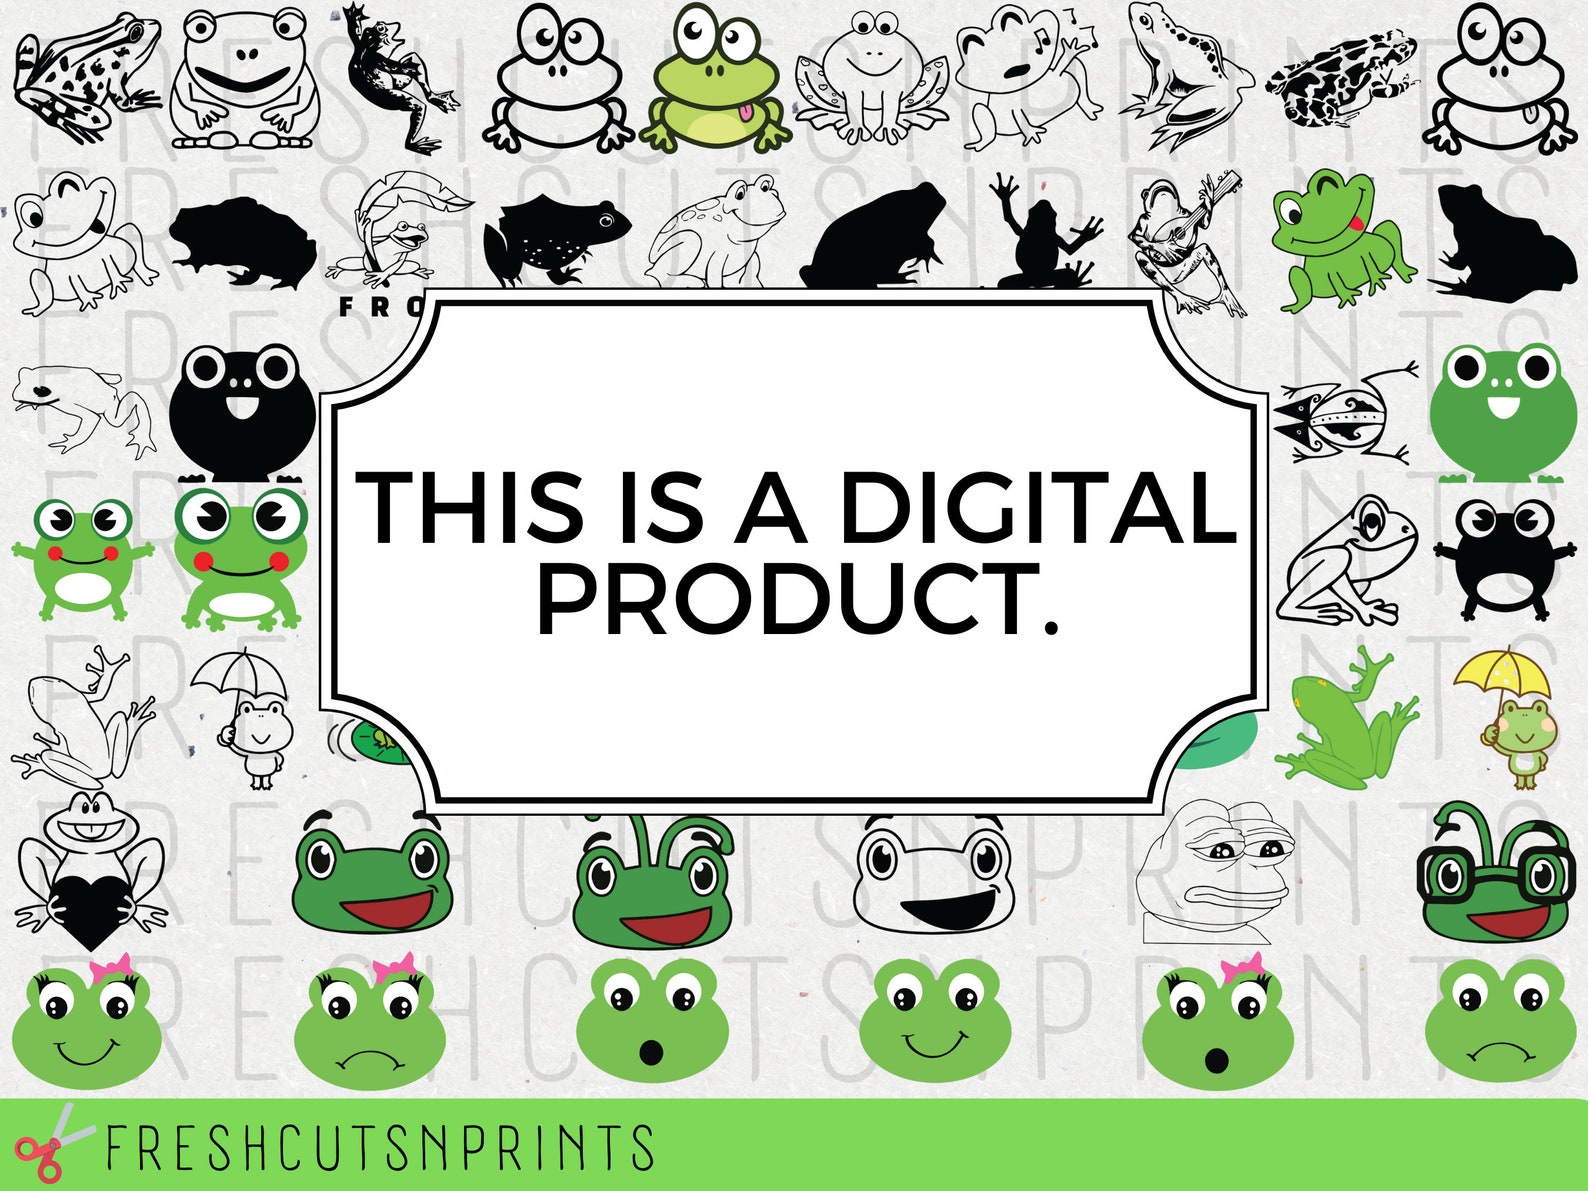 This is a digital product with frogs and frogs.